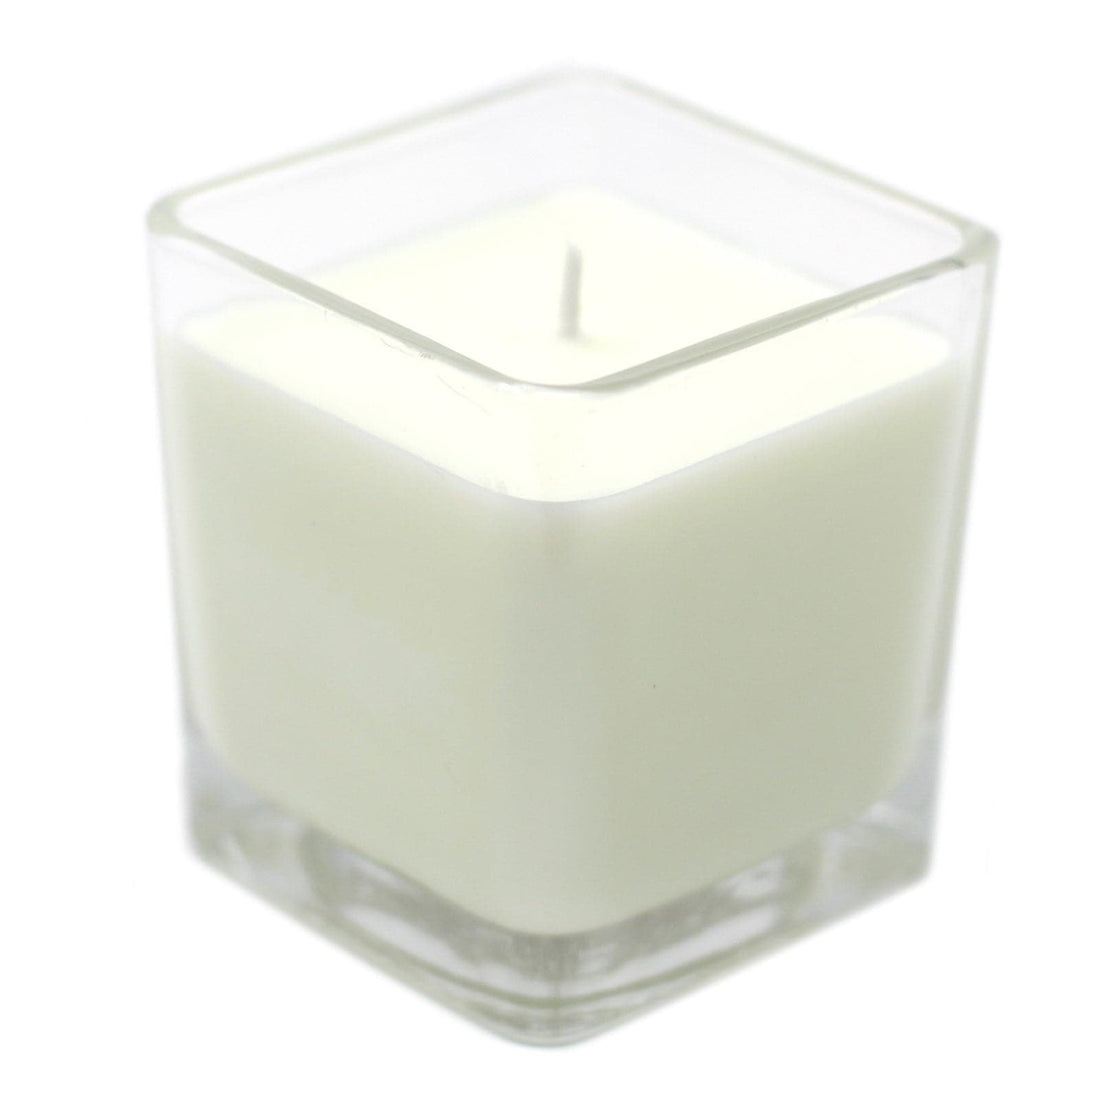 White Label Soy Wax Jar Candle - Cucumber & Mint - best price from Maltashopper.com WLSOYC-05